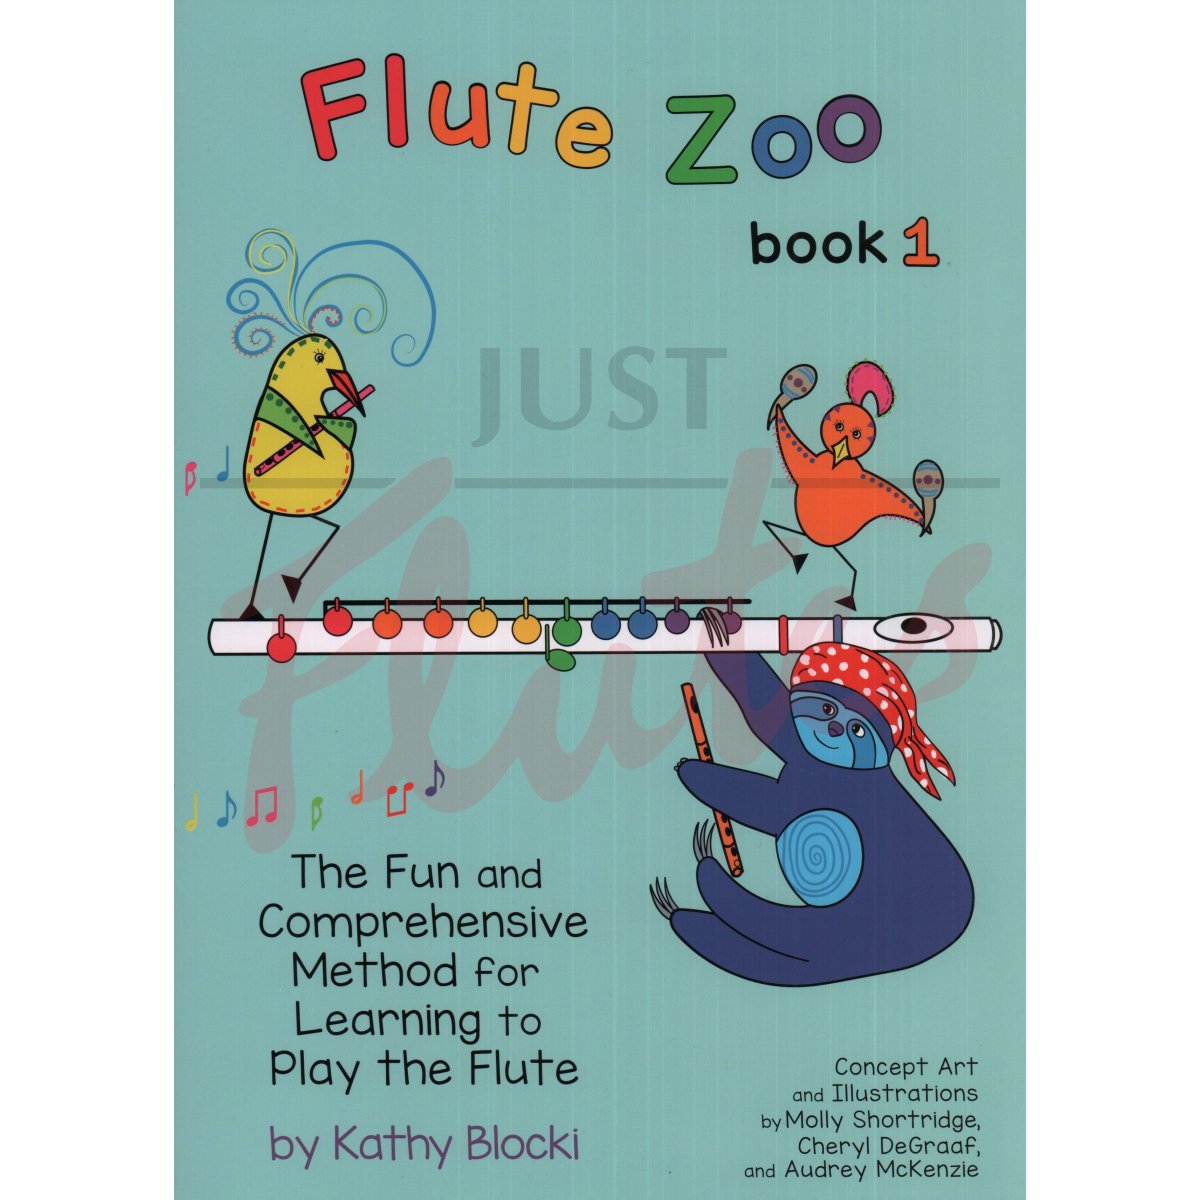 Flute Zoo Book 1